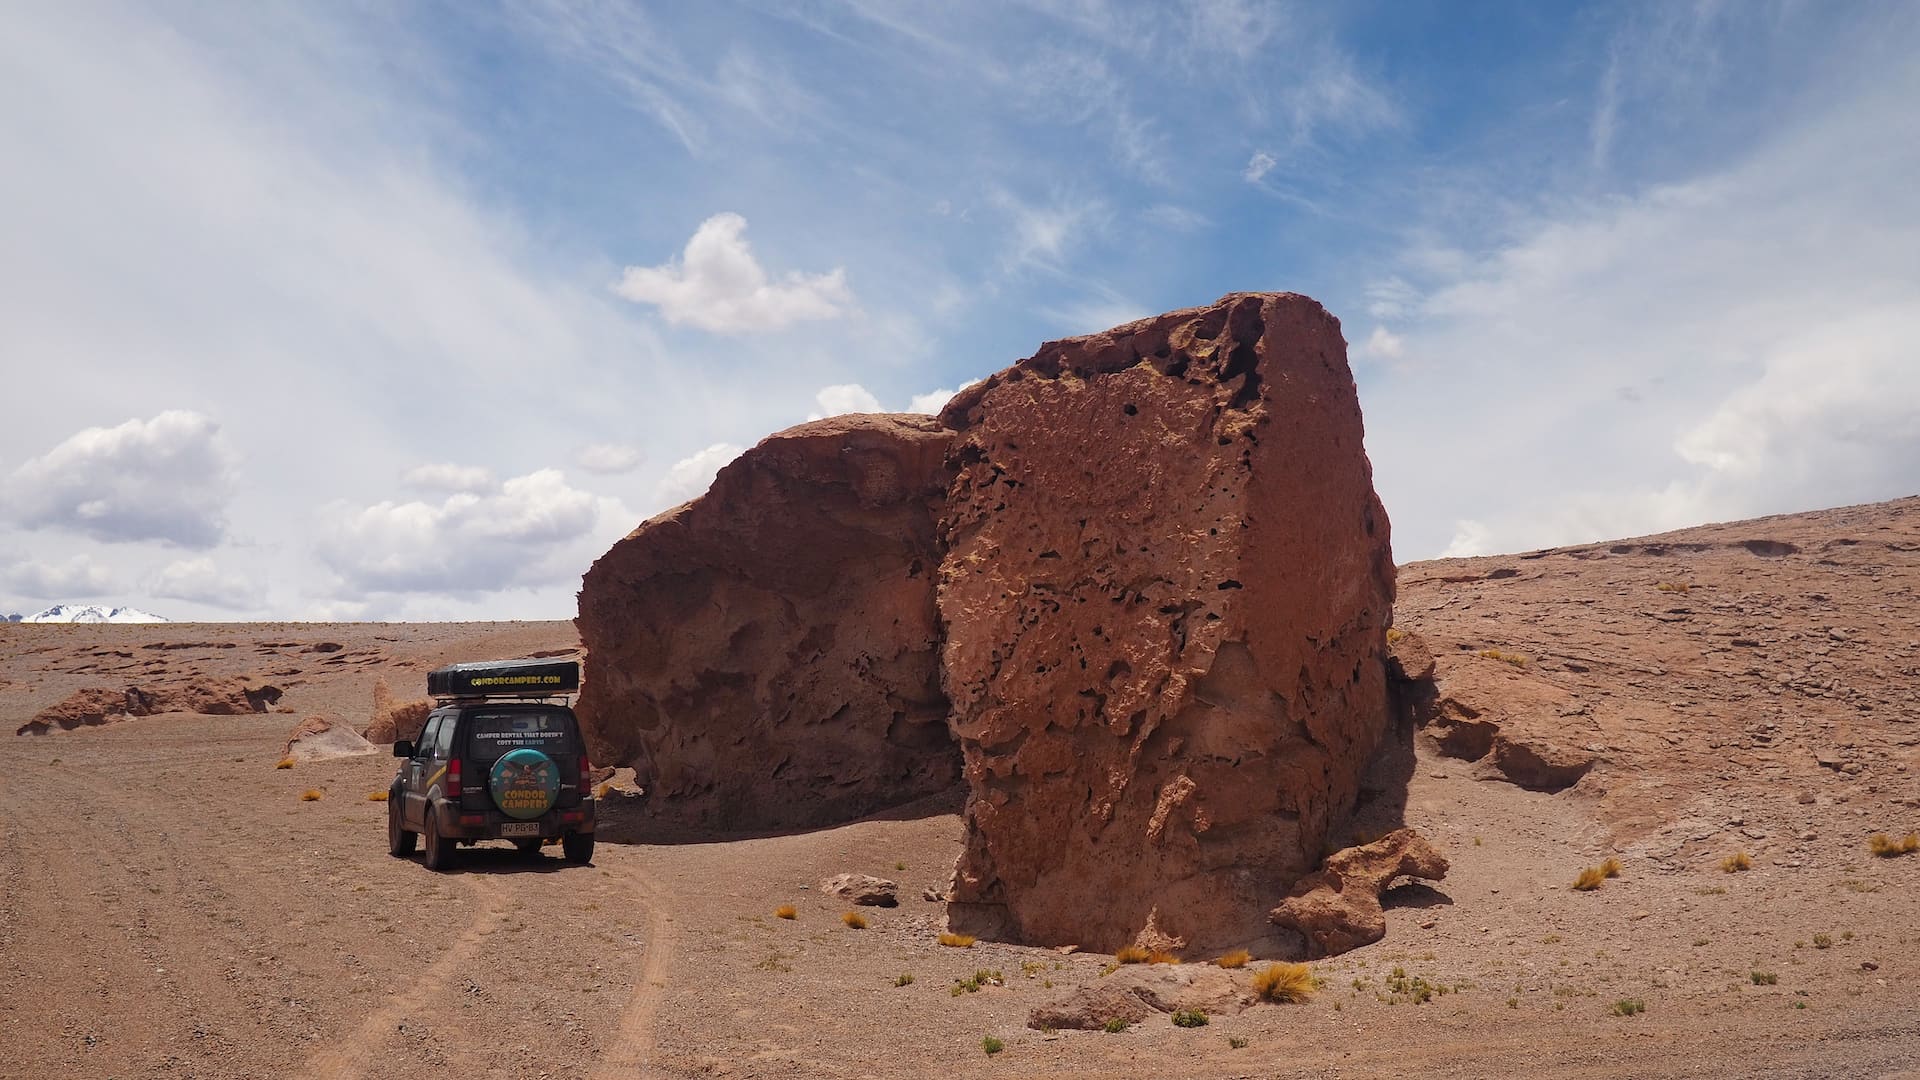 Camper van parked in the shadow of a rock formation